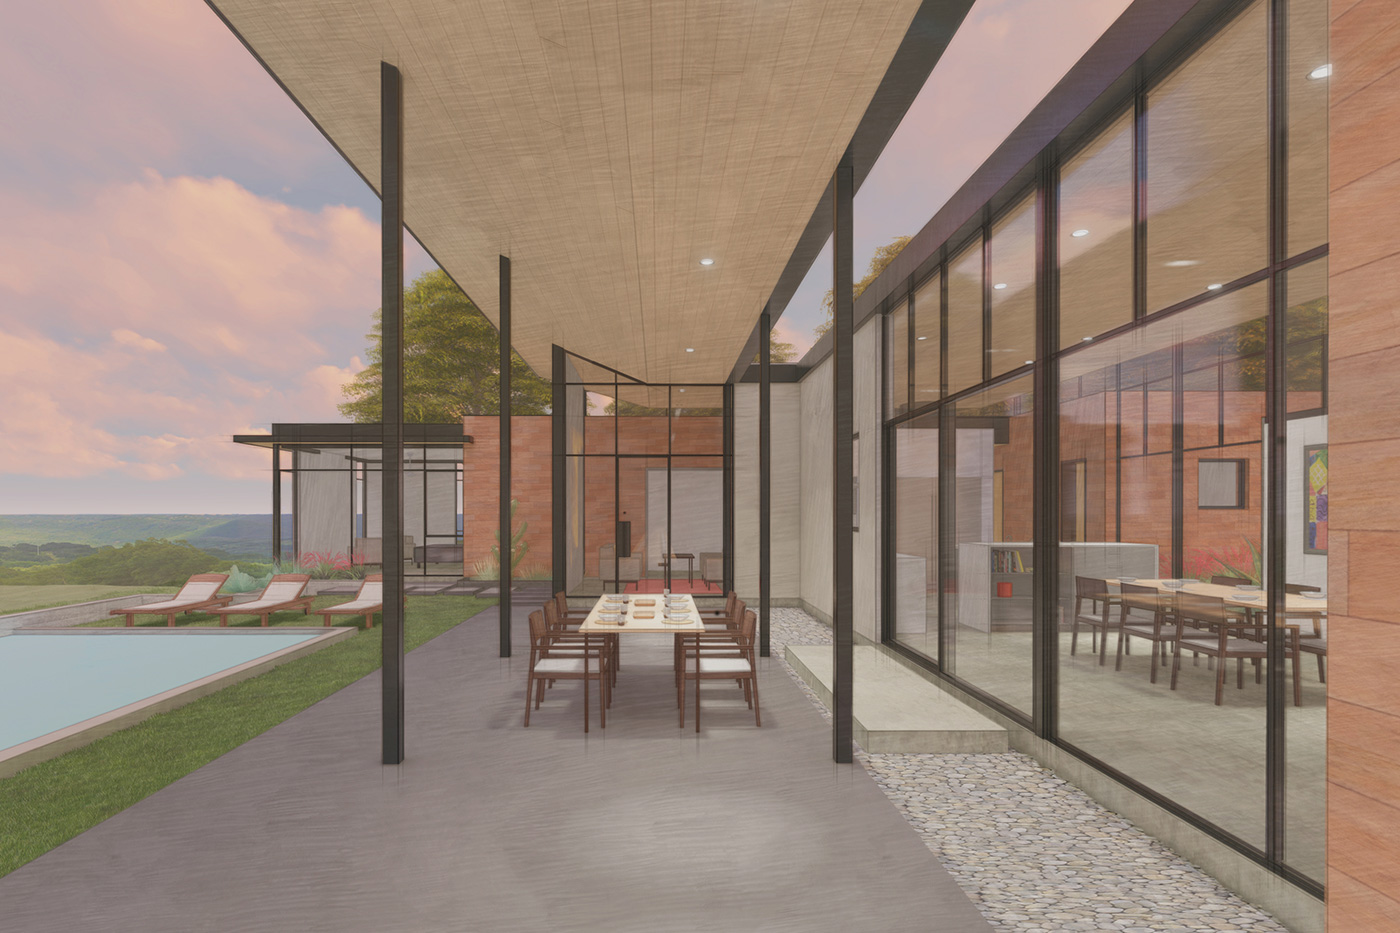 Rendering of patio dining space beside pool and back entrance of a home.